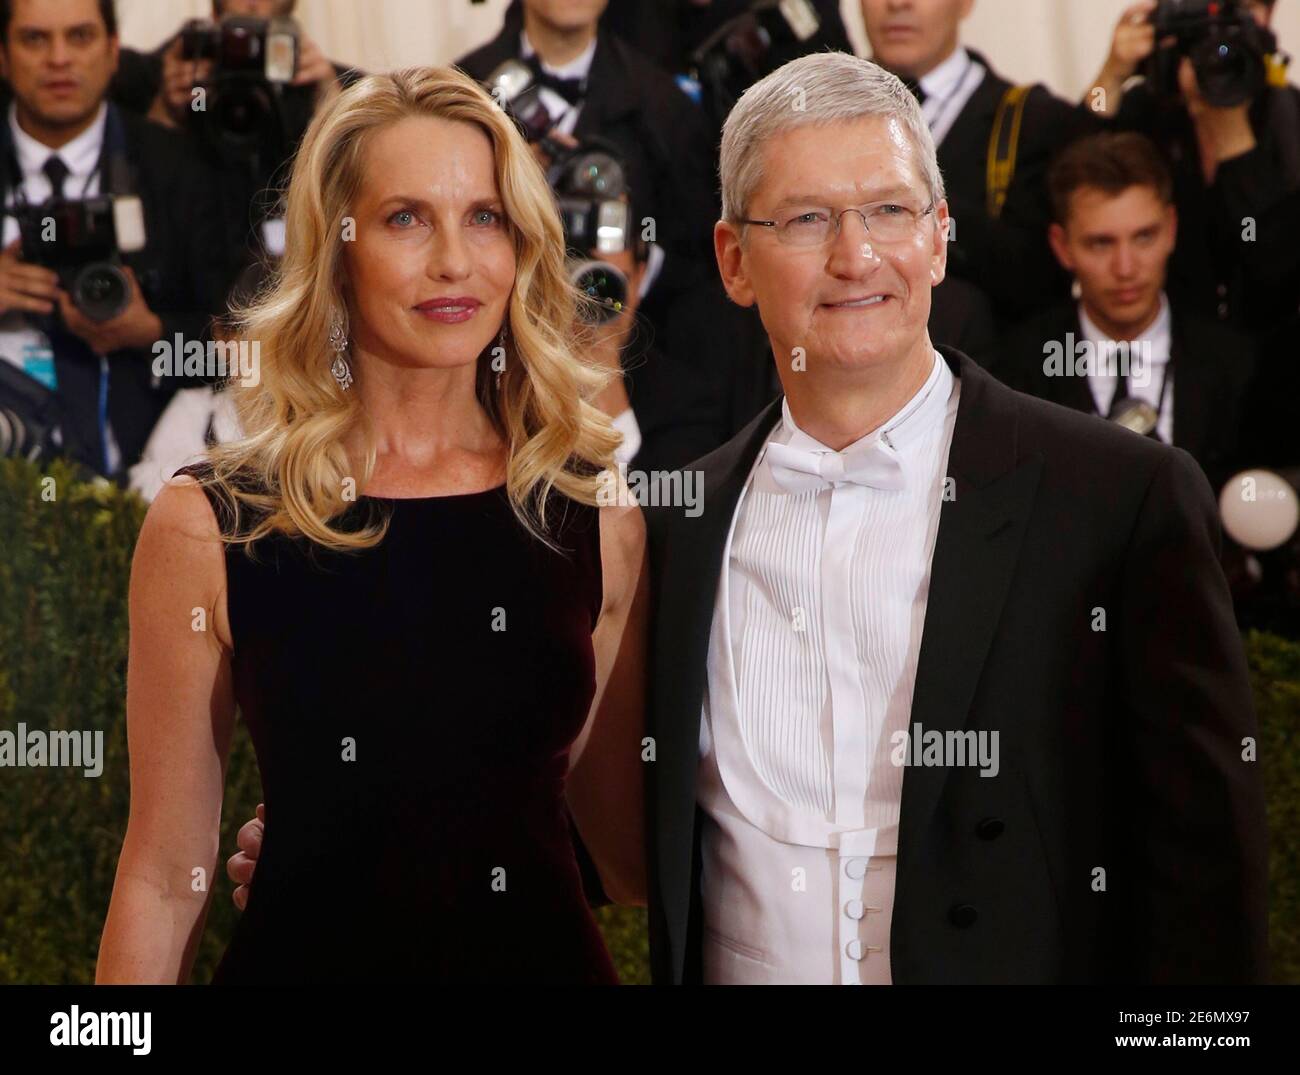 Apple CEO Cook and Steve Jobs' widow Laurene Powell arrive at the Metropolitan Museum of Art Costume Institute Gala (Met Gala) to celebrate the opening of "Manus x Machina: Fashion